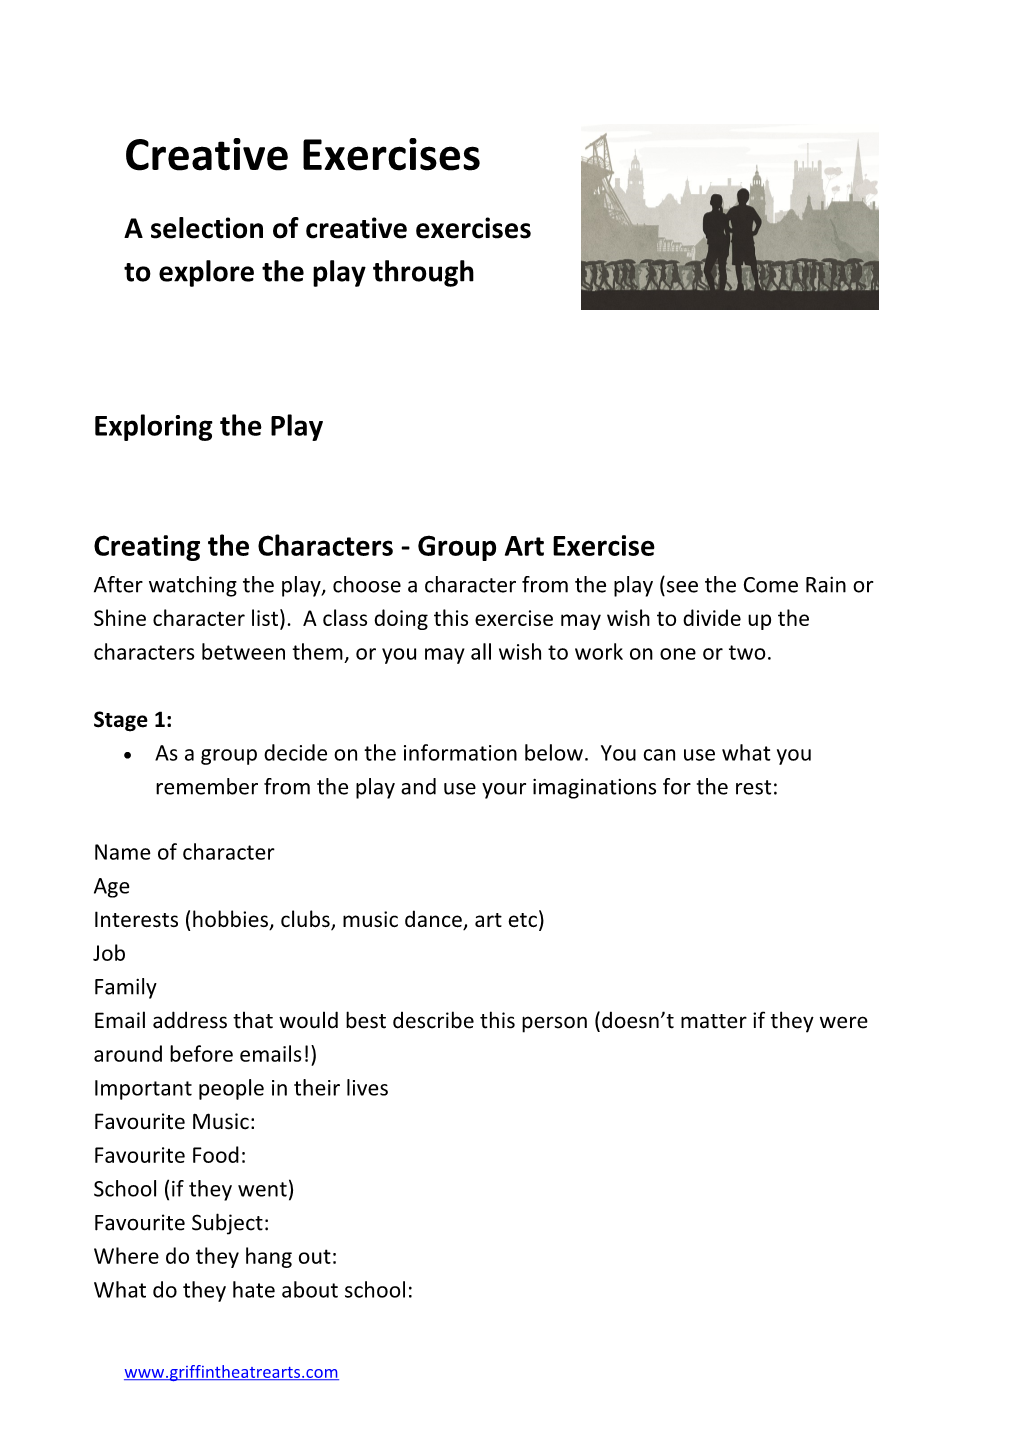 A Selection of Creative Exercises to Explore the Play Through